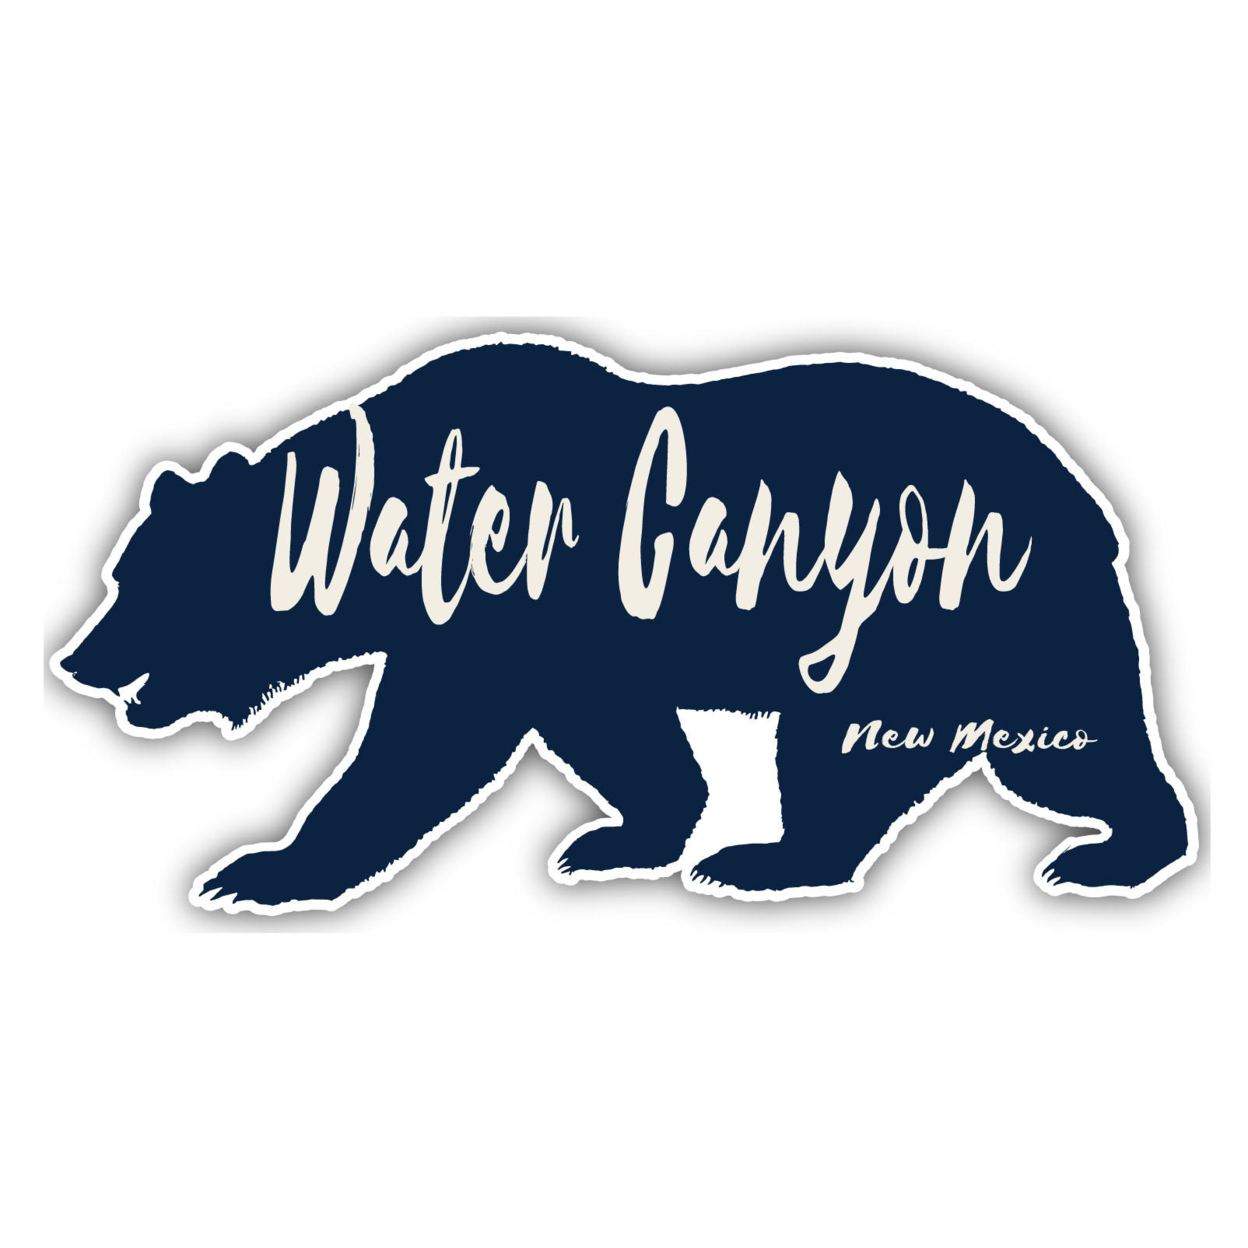 Water Canyon New Mexico Souvenir Decorative Stickers (Choose Theme And Size) - Single Unit, 2-Inch, Bear